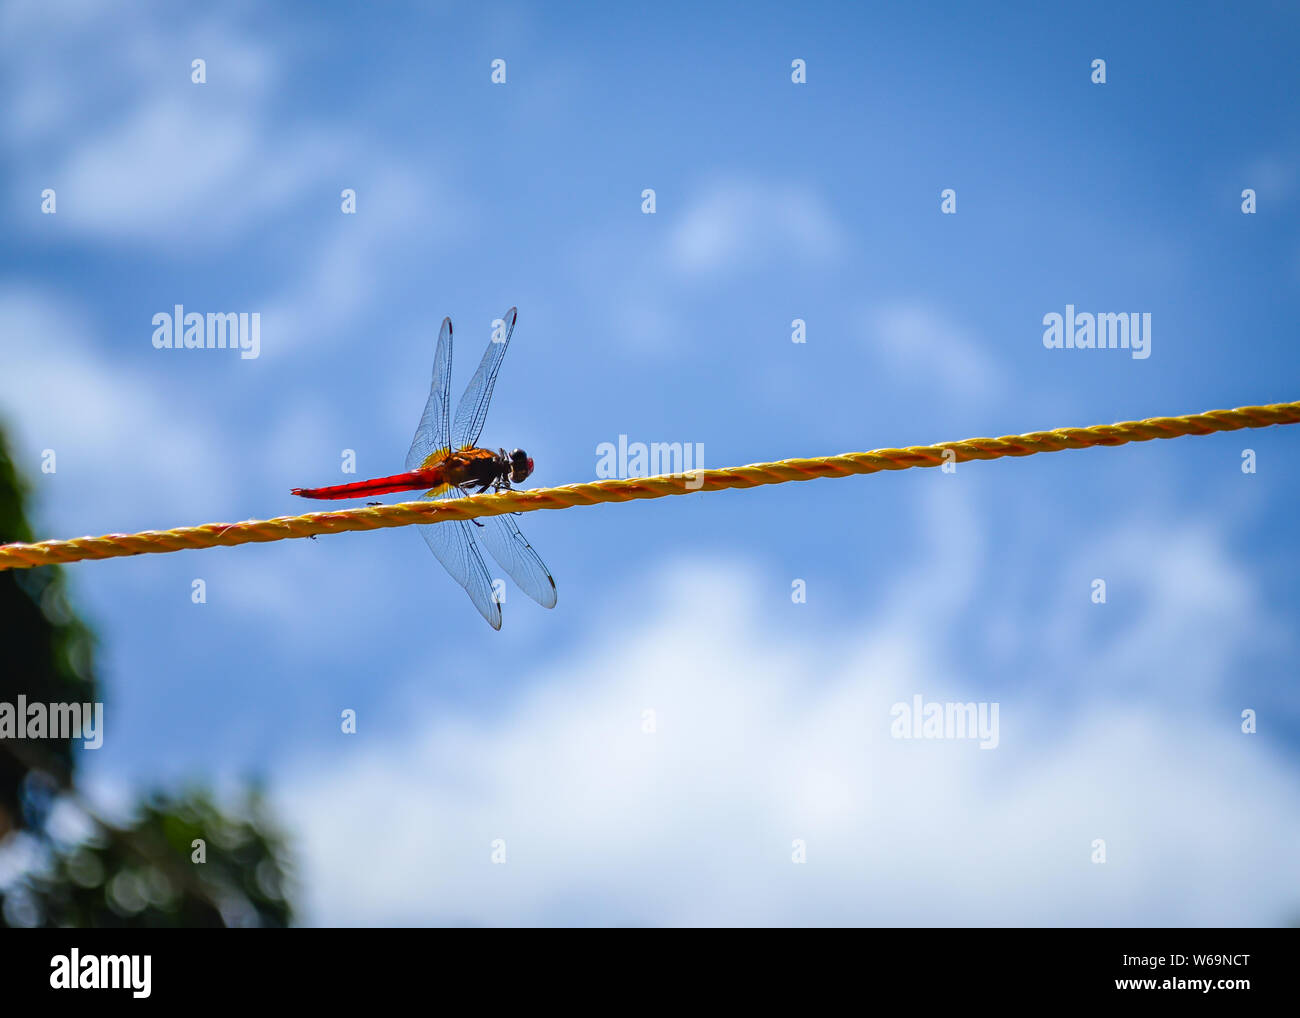 Red Dragonfly dancing on a yellow plastic rope against a blue sky background. Stock Photo